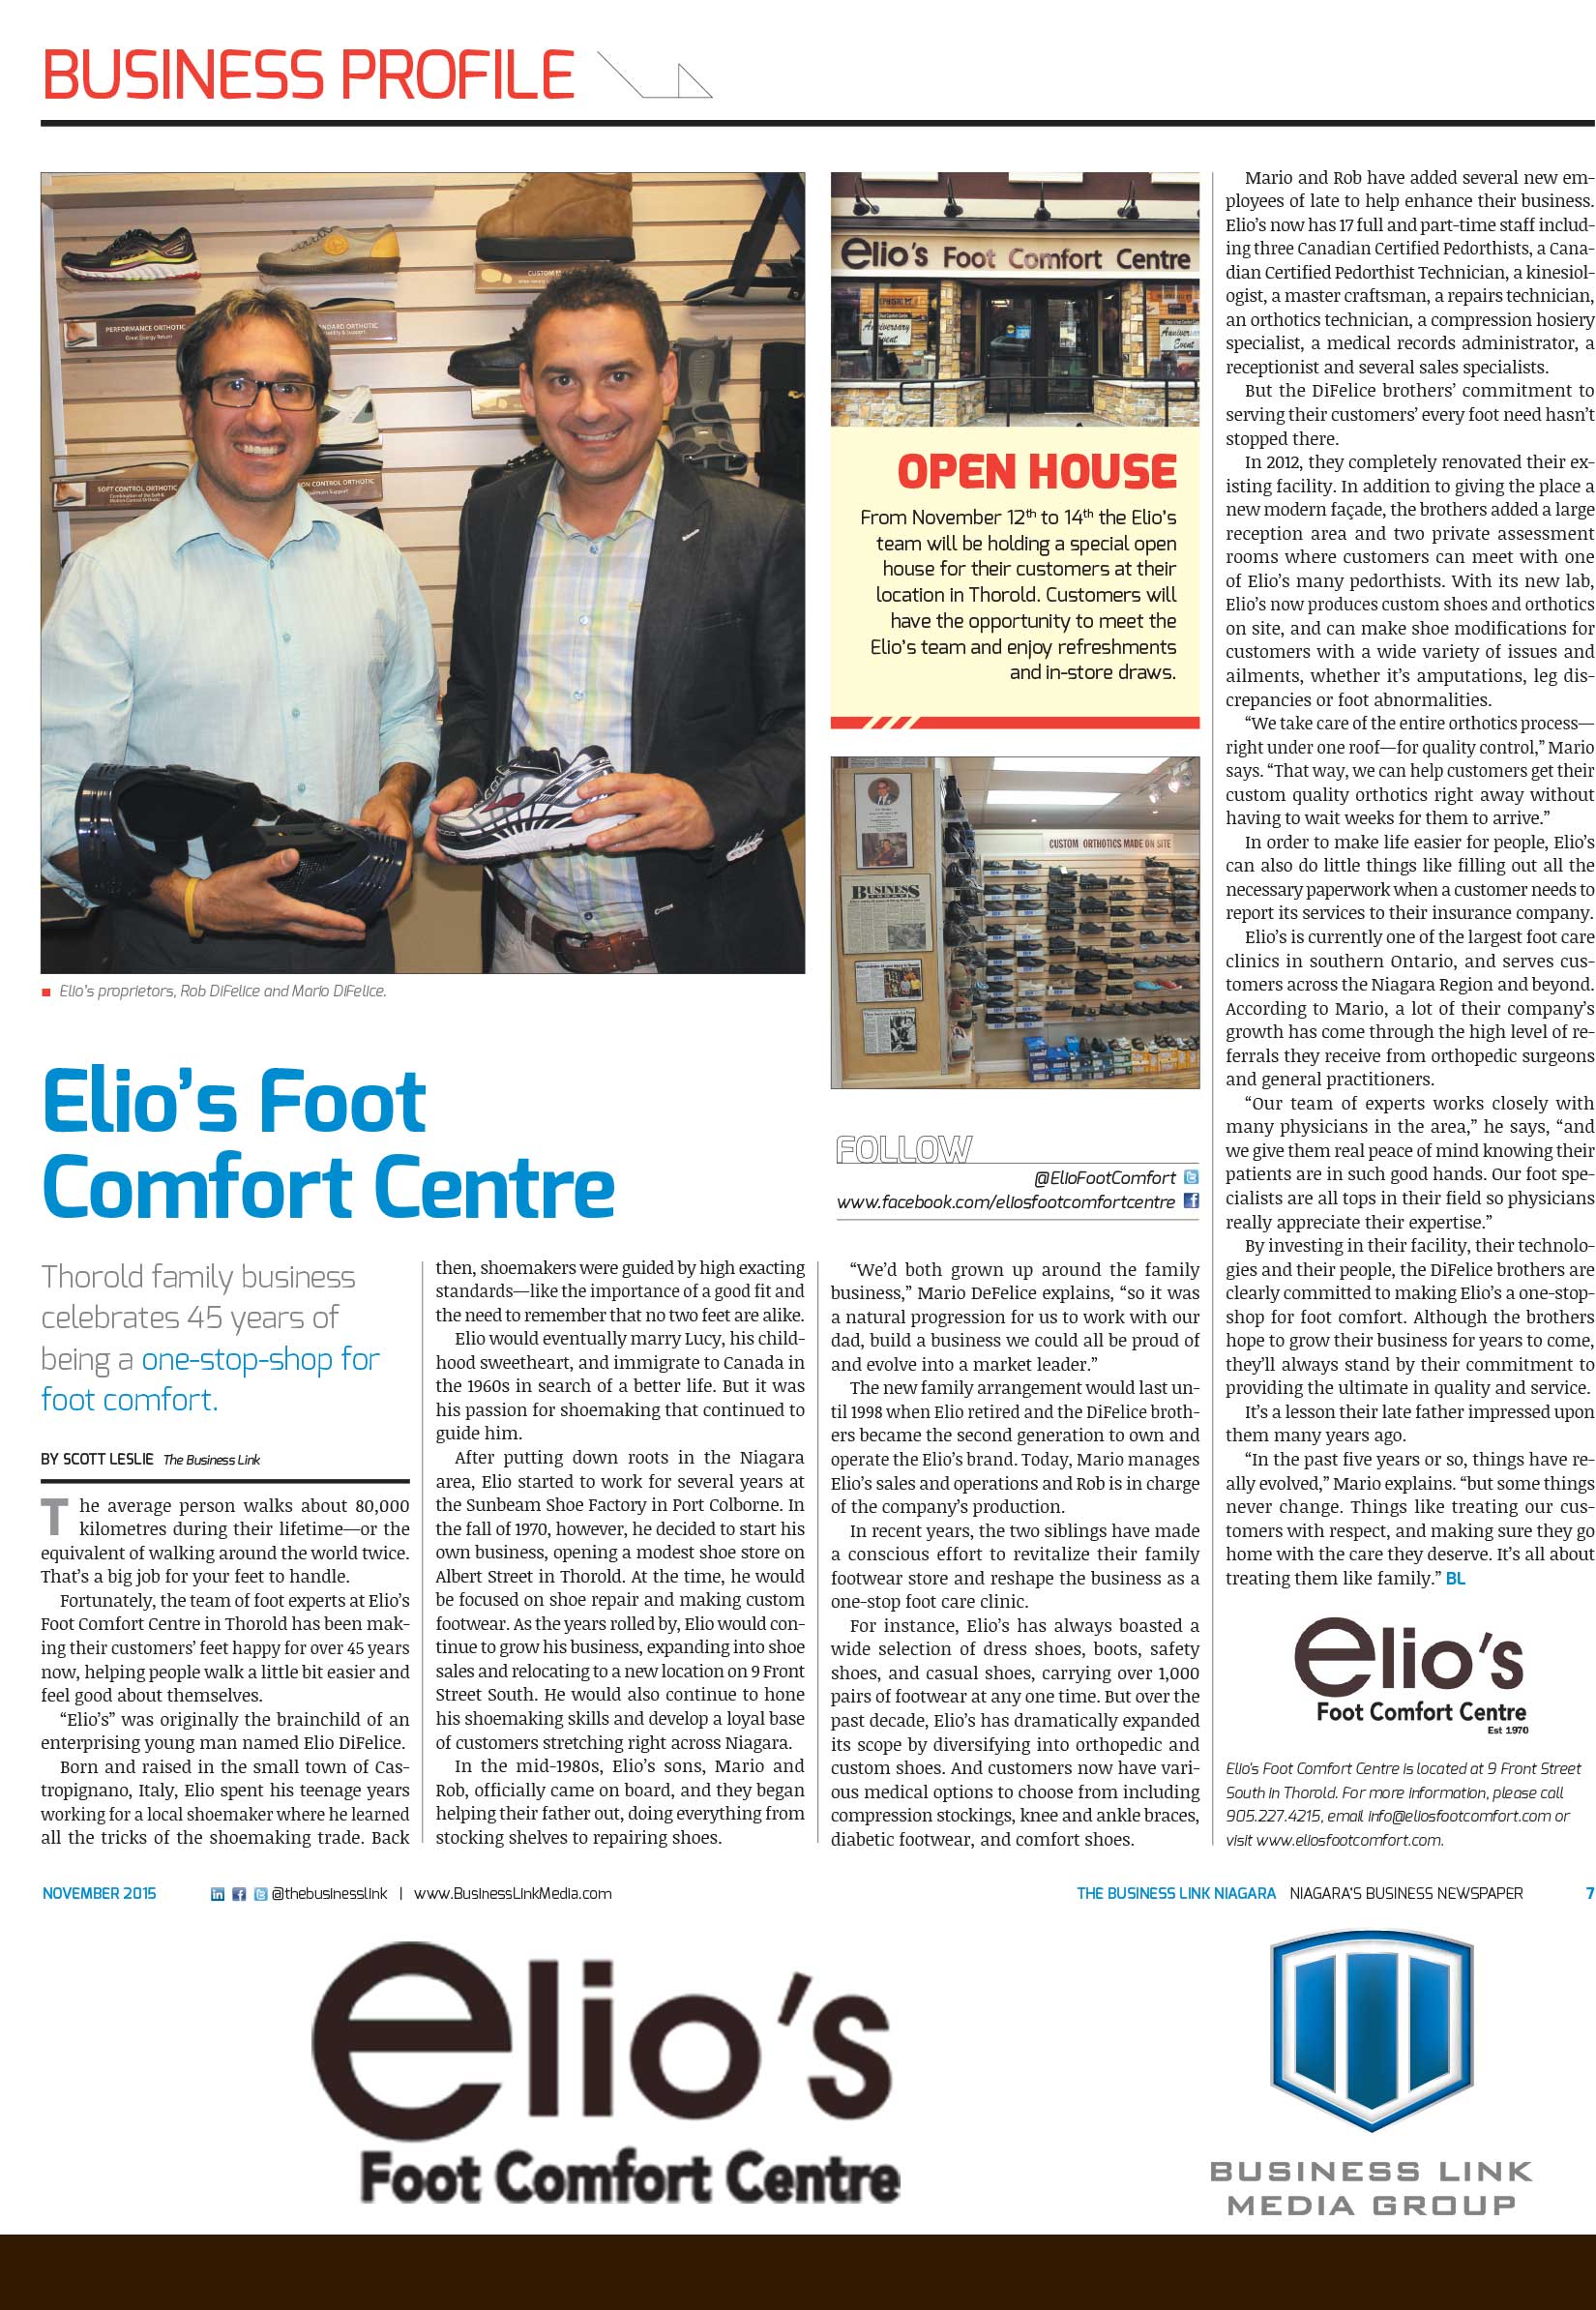 Elio's Business Profile in the Business Link Newspaper